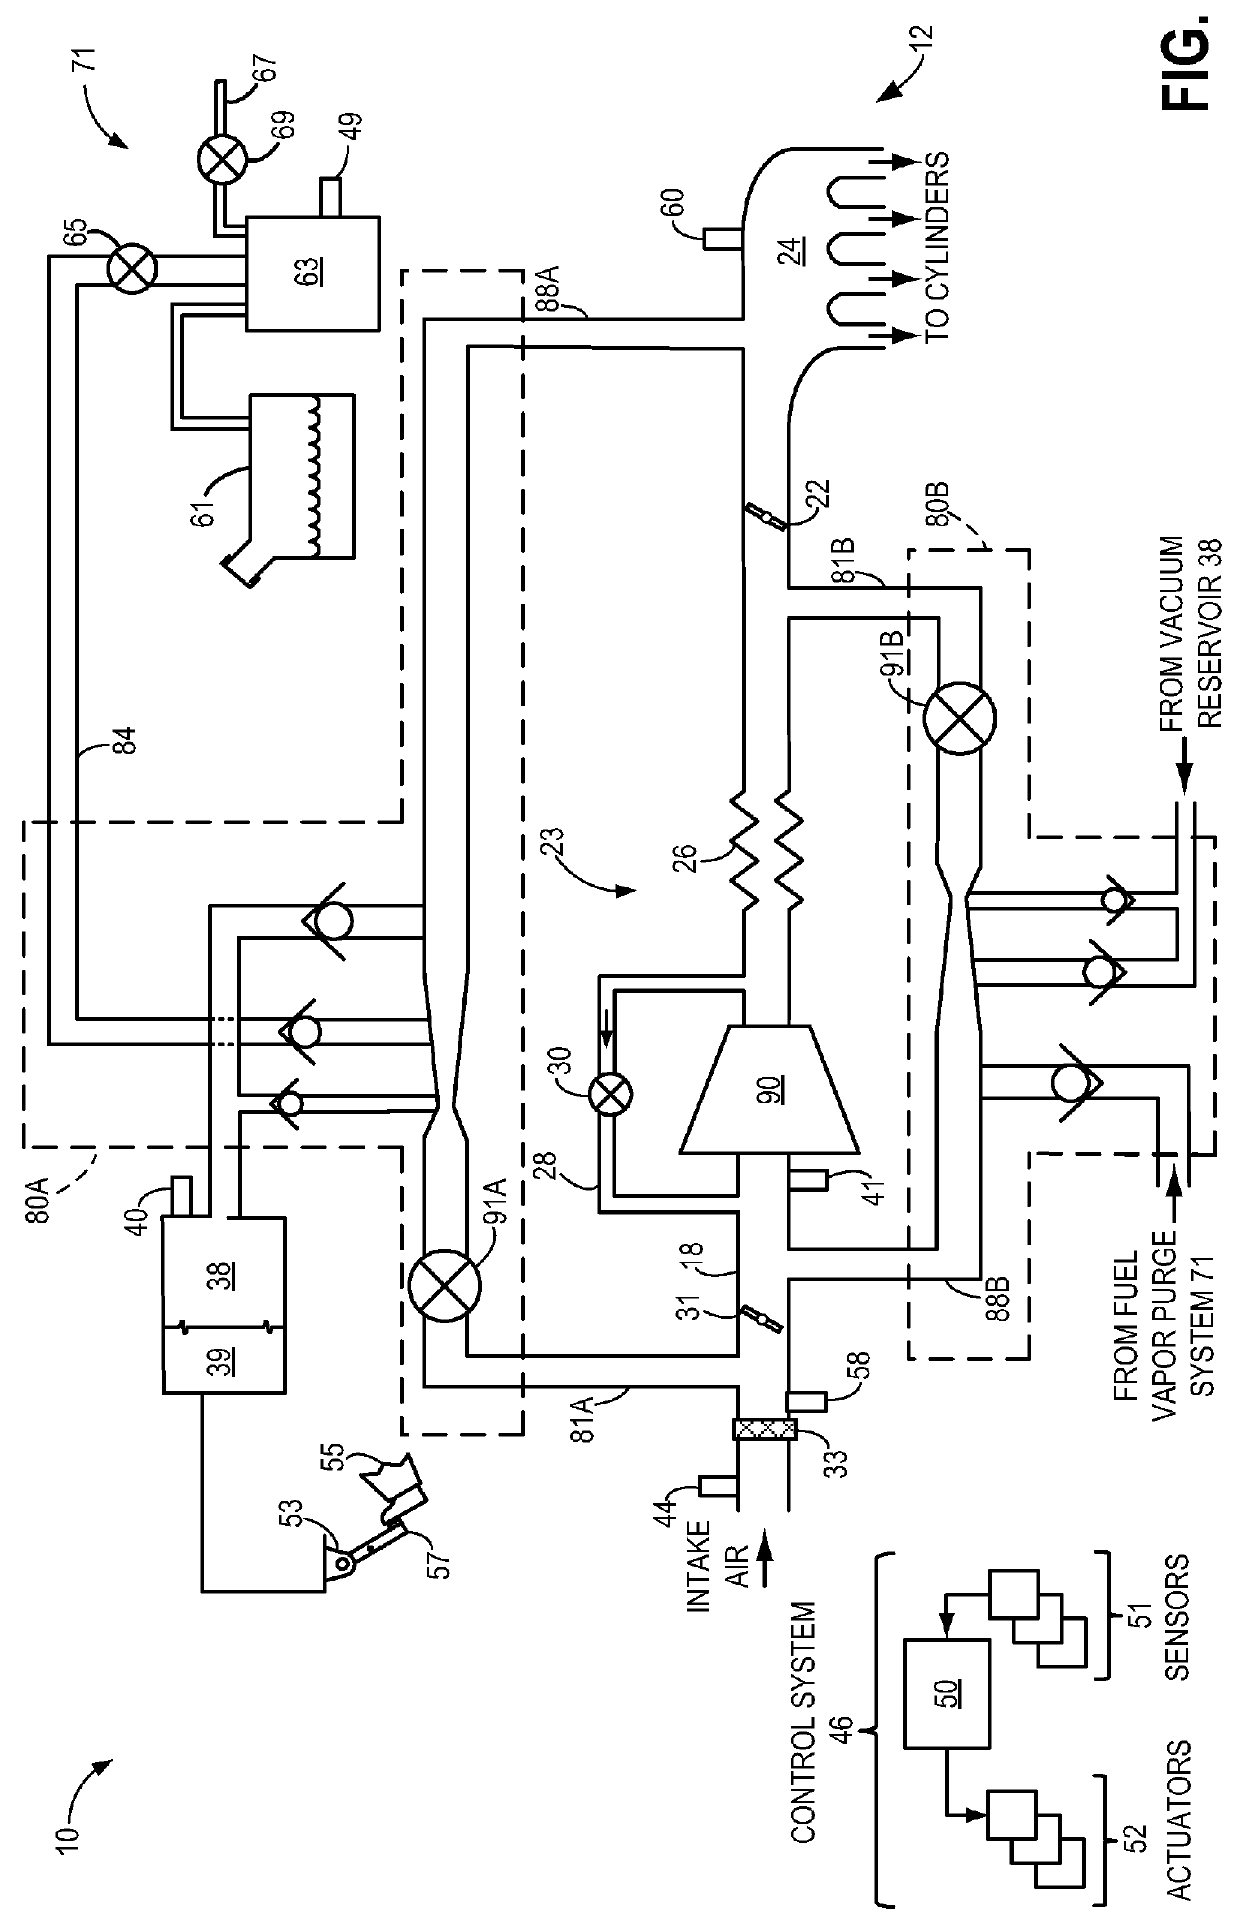 Aspirator motive flow control for vacuum generation and compressor bypass